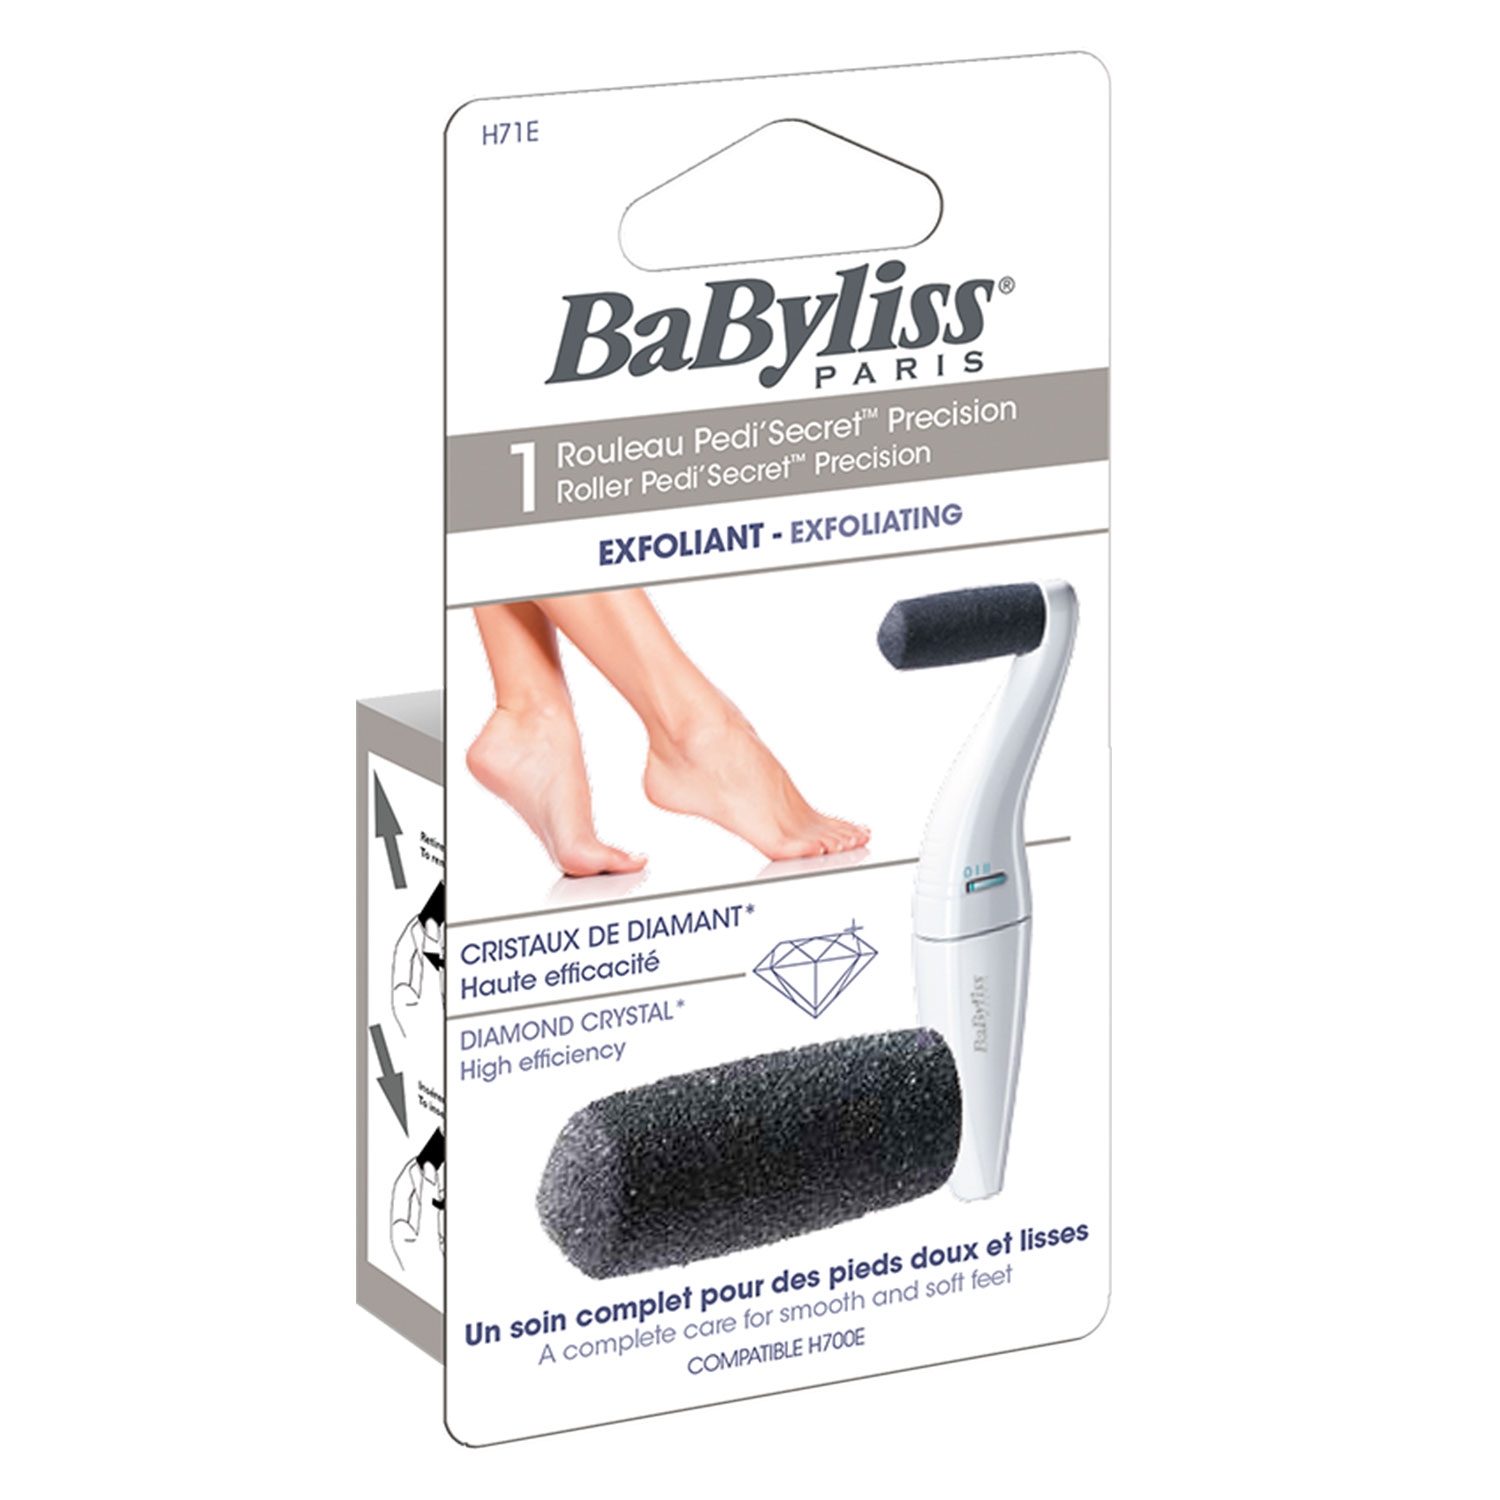 Product image from Babyliss - Pedi' Secret Precision Peeling Rolle